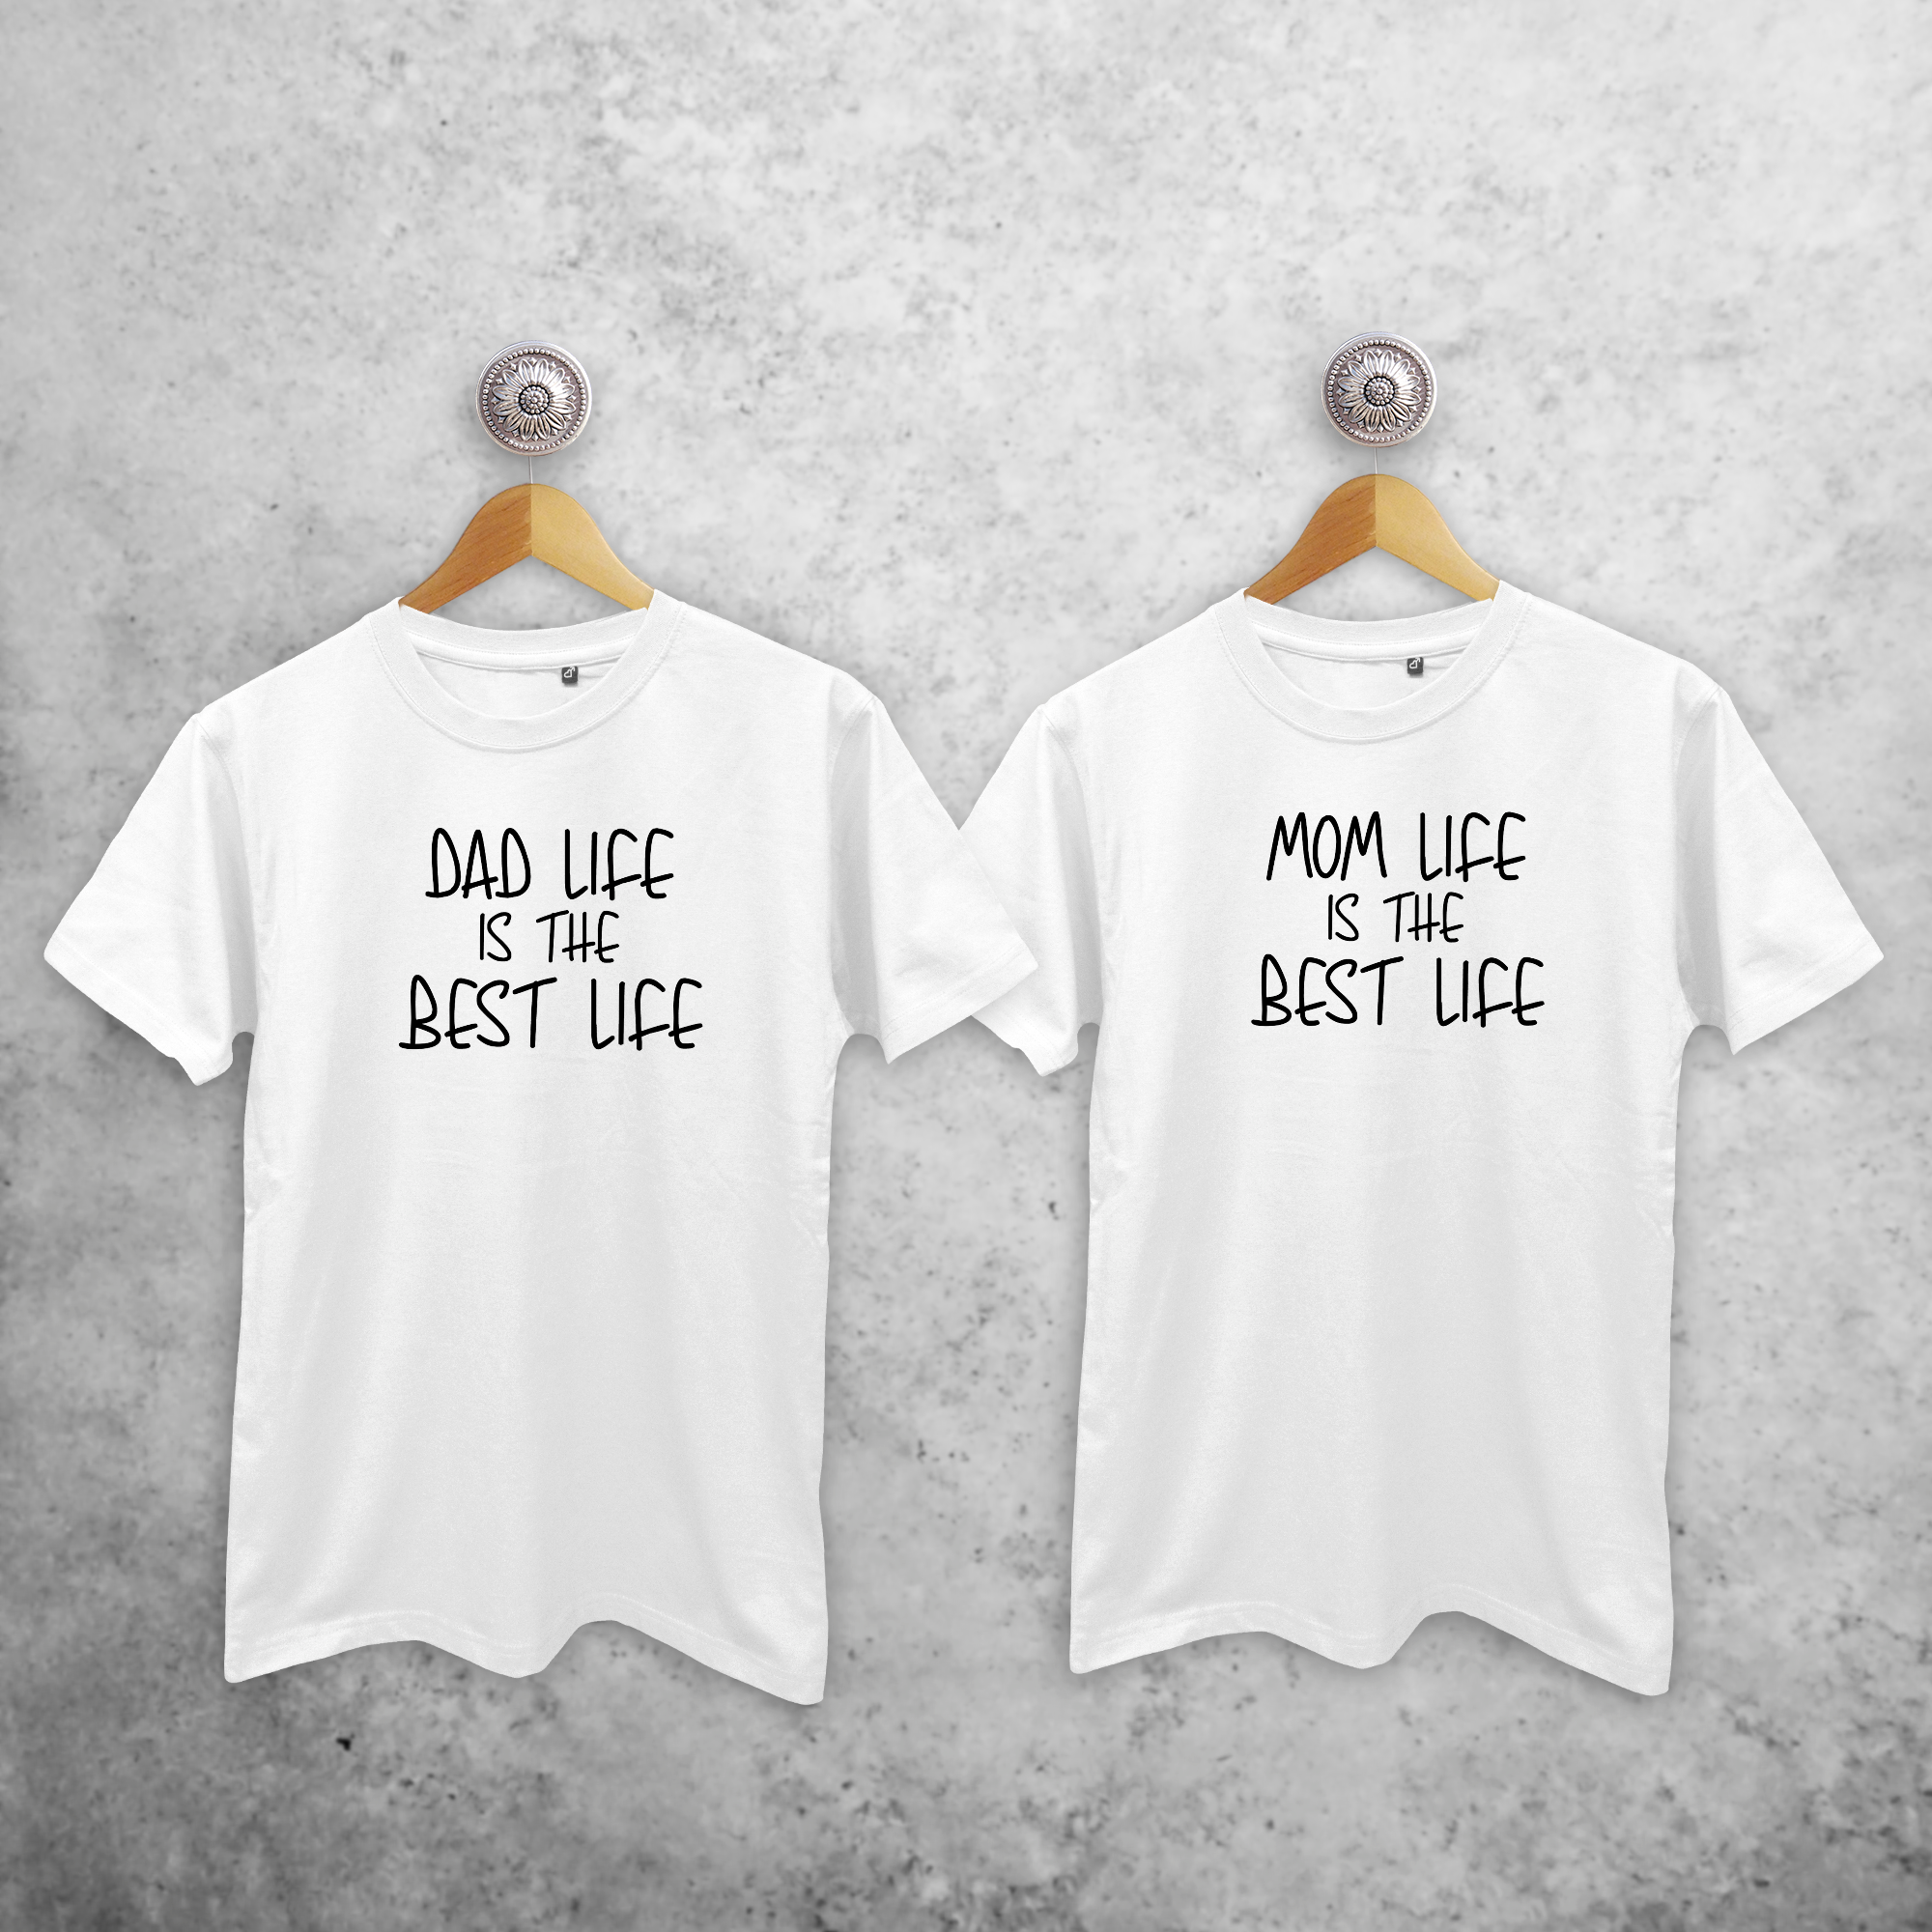 'Dad life is the best life' & 'Mom life is the best life' koppel shirts